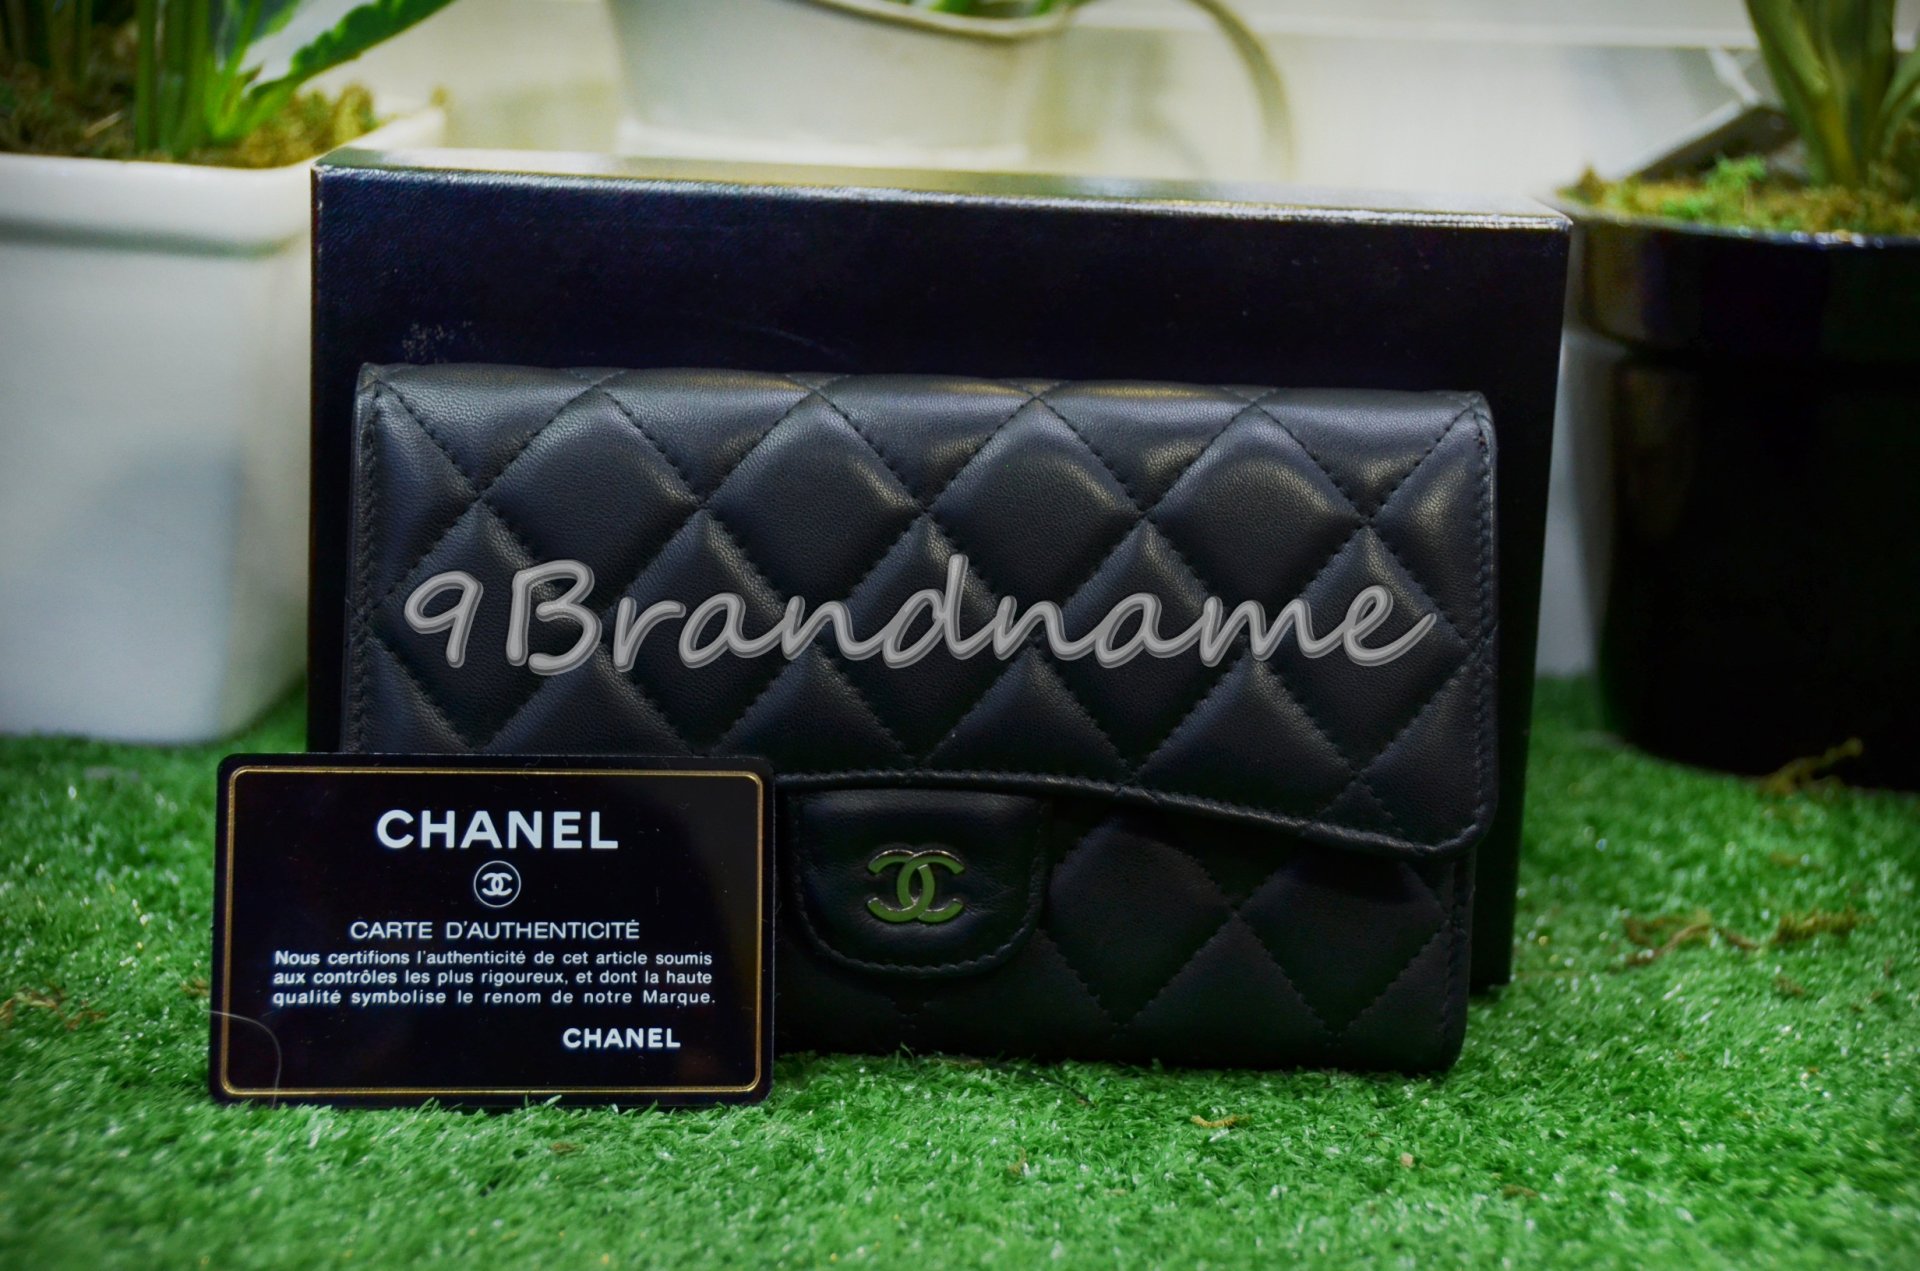 Chanel Wallet Black Lamp Tri-Fold - Used Authentic Bag - 9brandname